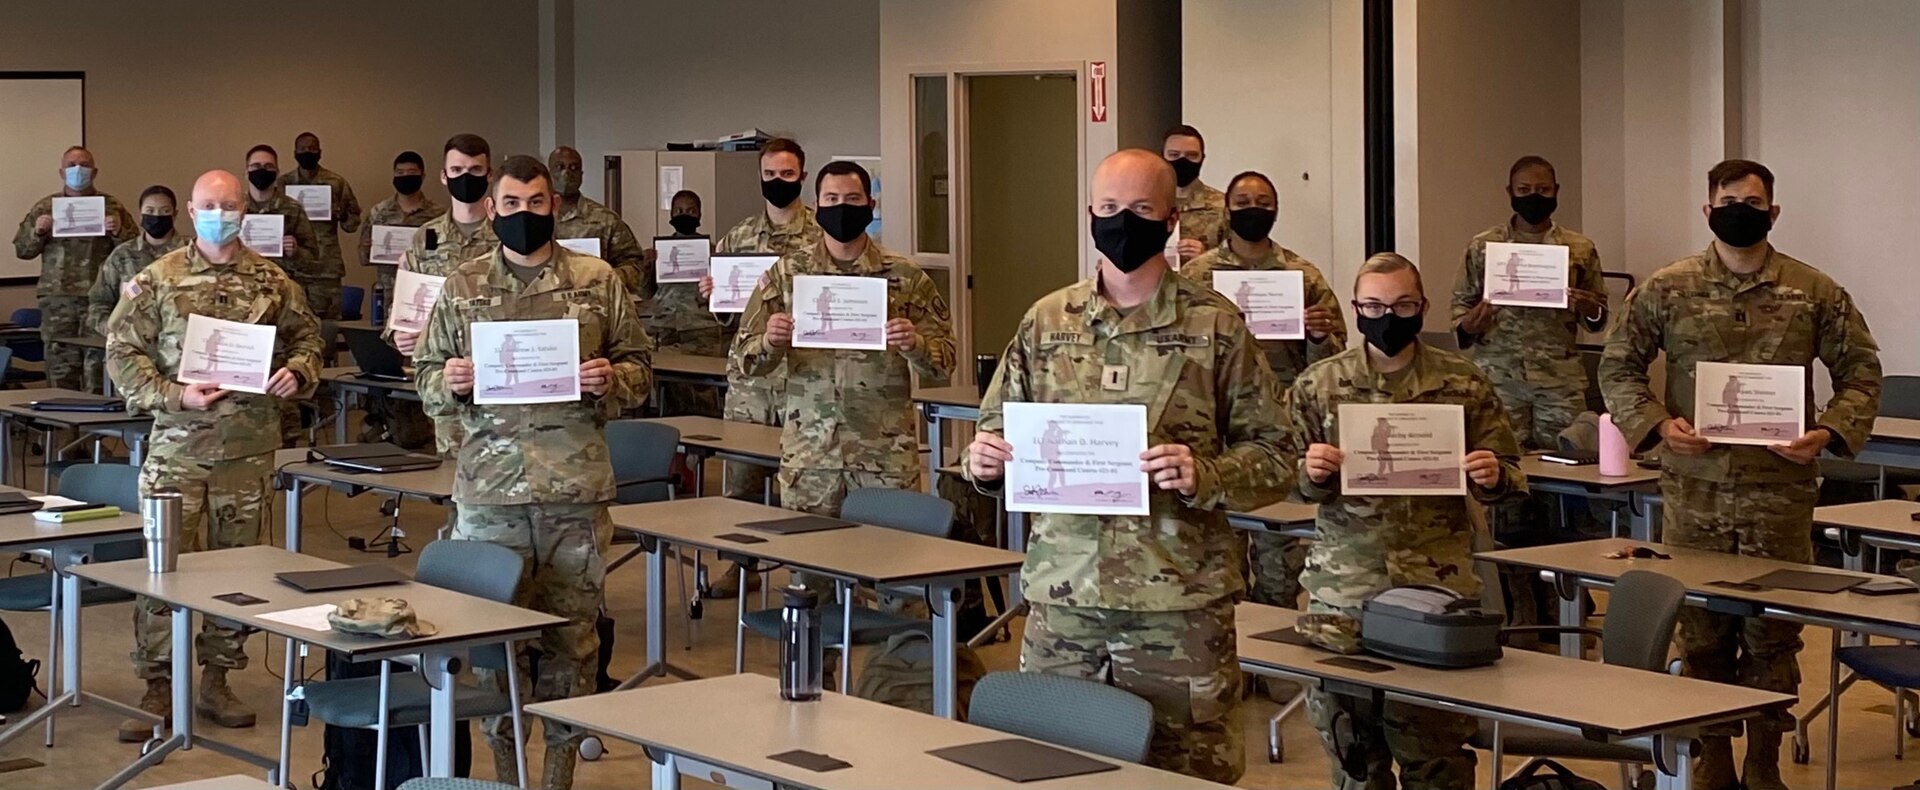 U.S. Army officers and noncommissioned officers from the Georgia Army National Guard proudly show their diplomas after graduating from Company Command Pre-Command Course at Clay National Guard Center in Marietta, Georgia, Oct. 30, 2020. The five-day leadership course trained company command teams on systems and services to effectively lead their formations.